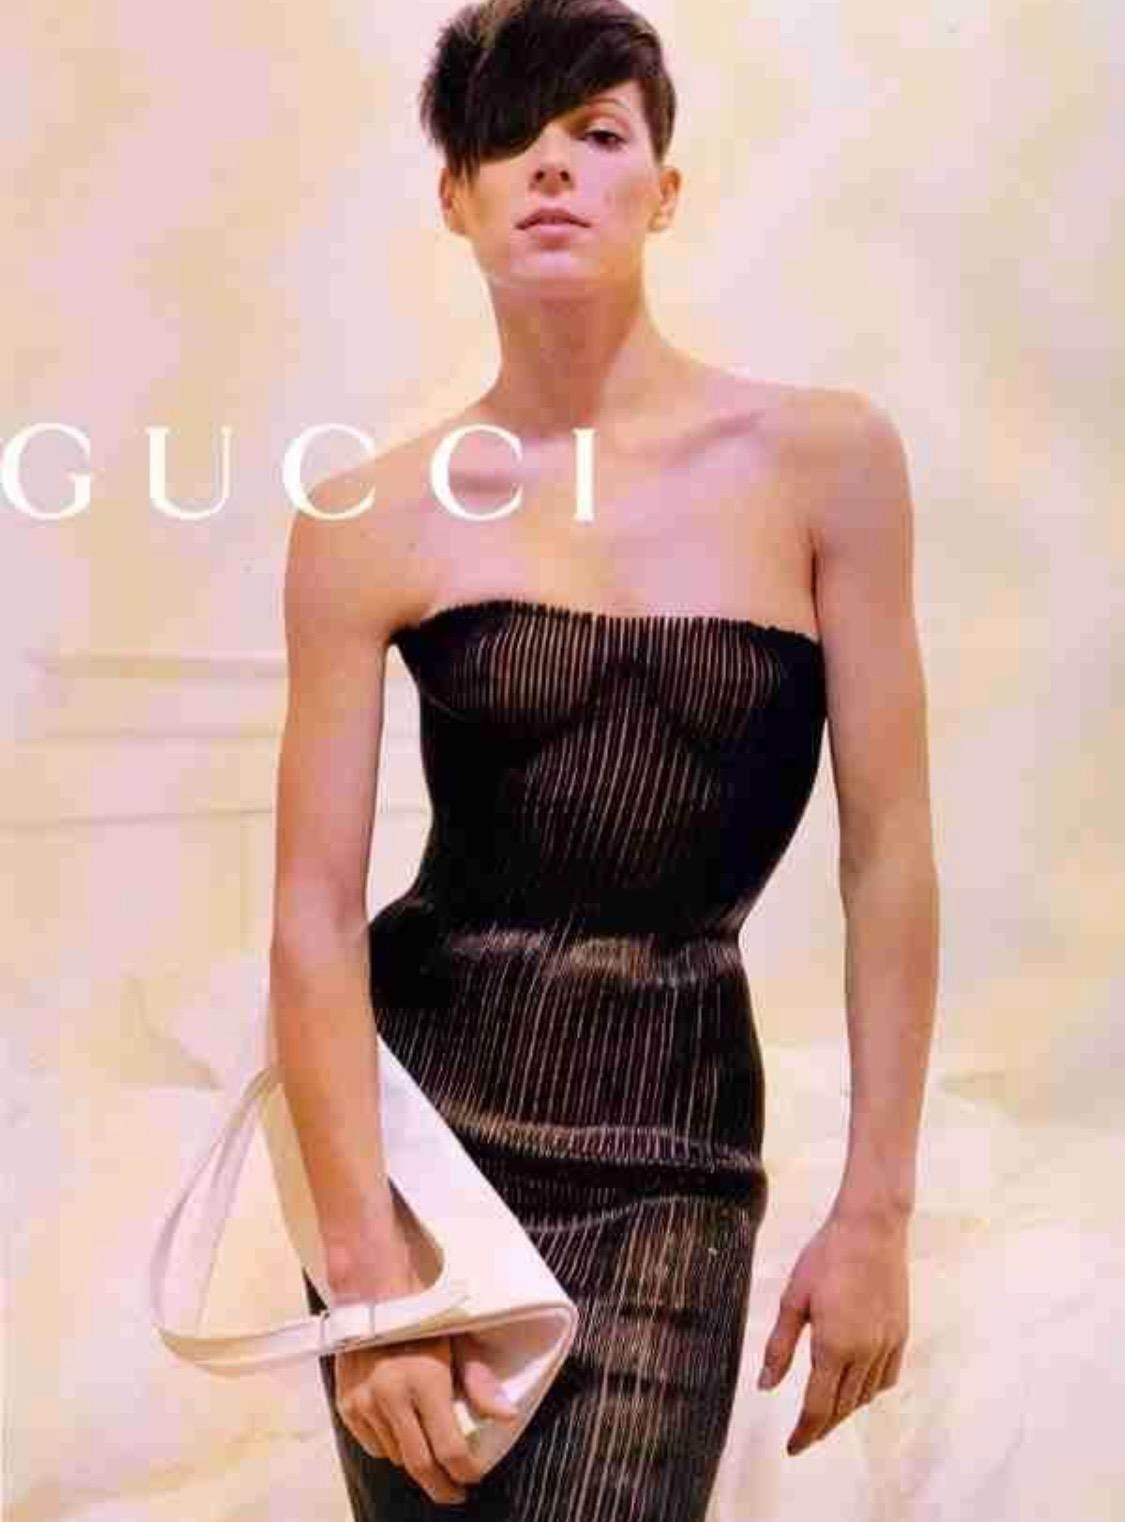 NWT S/S 2001 Gucci by Tom Ford Leather Mesh Corset Runway Tube Dress en vente 1